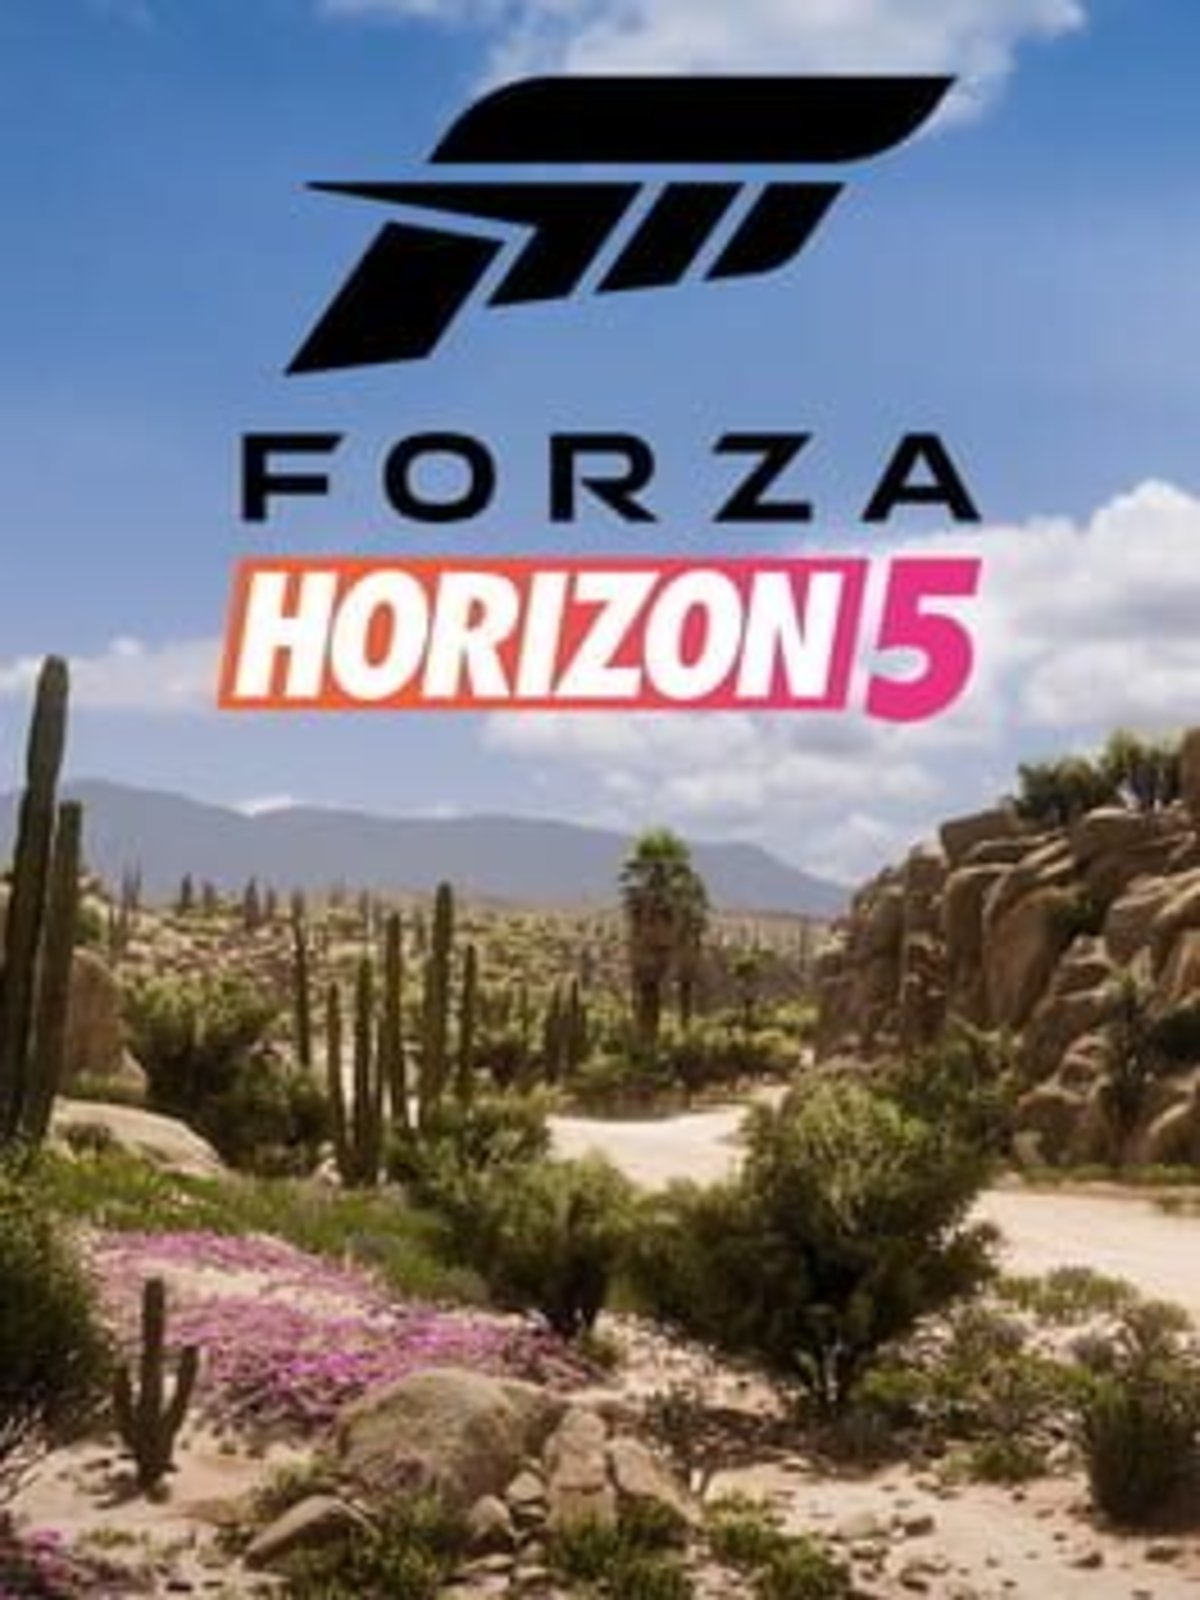 Forza Horizon 5 hits record numbers for Xbox Game Studios at premiere